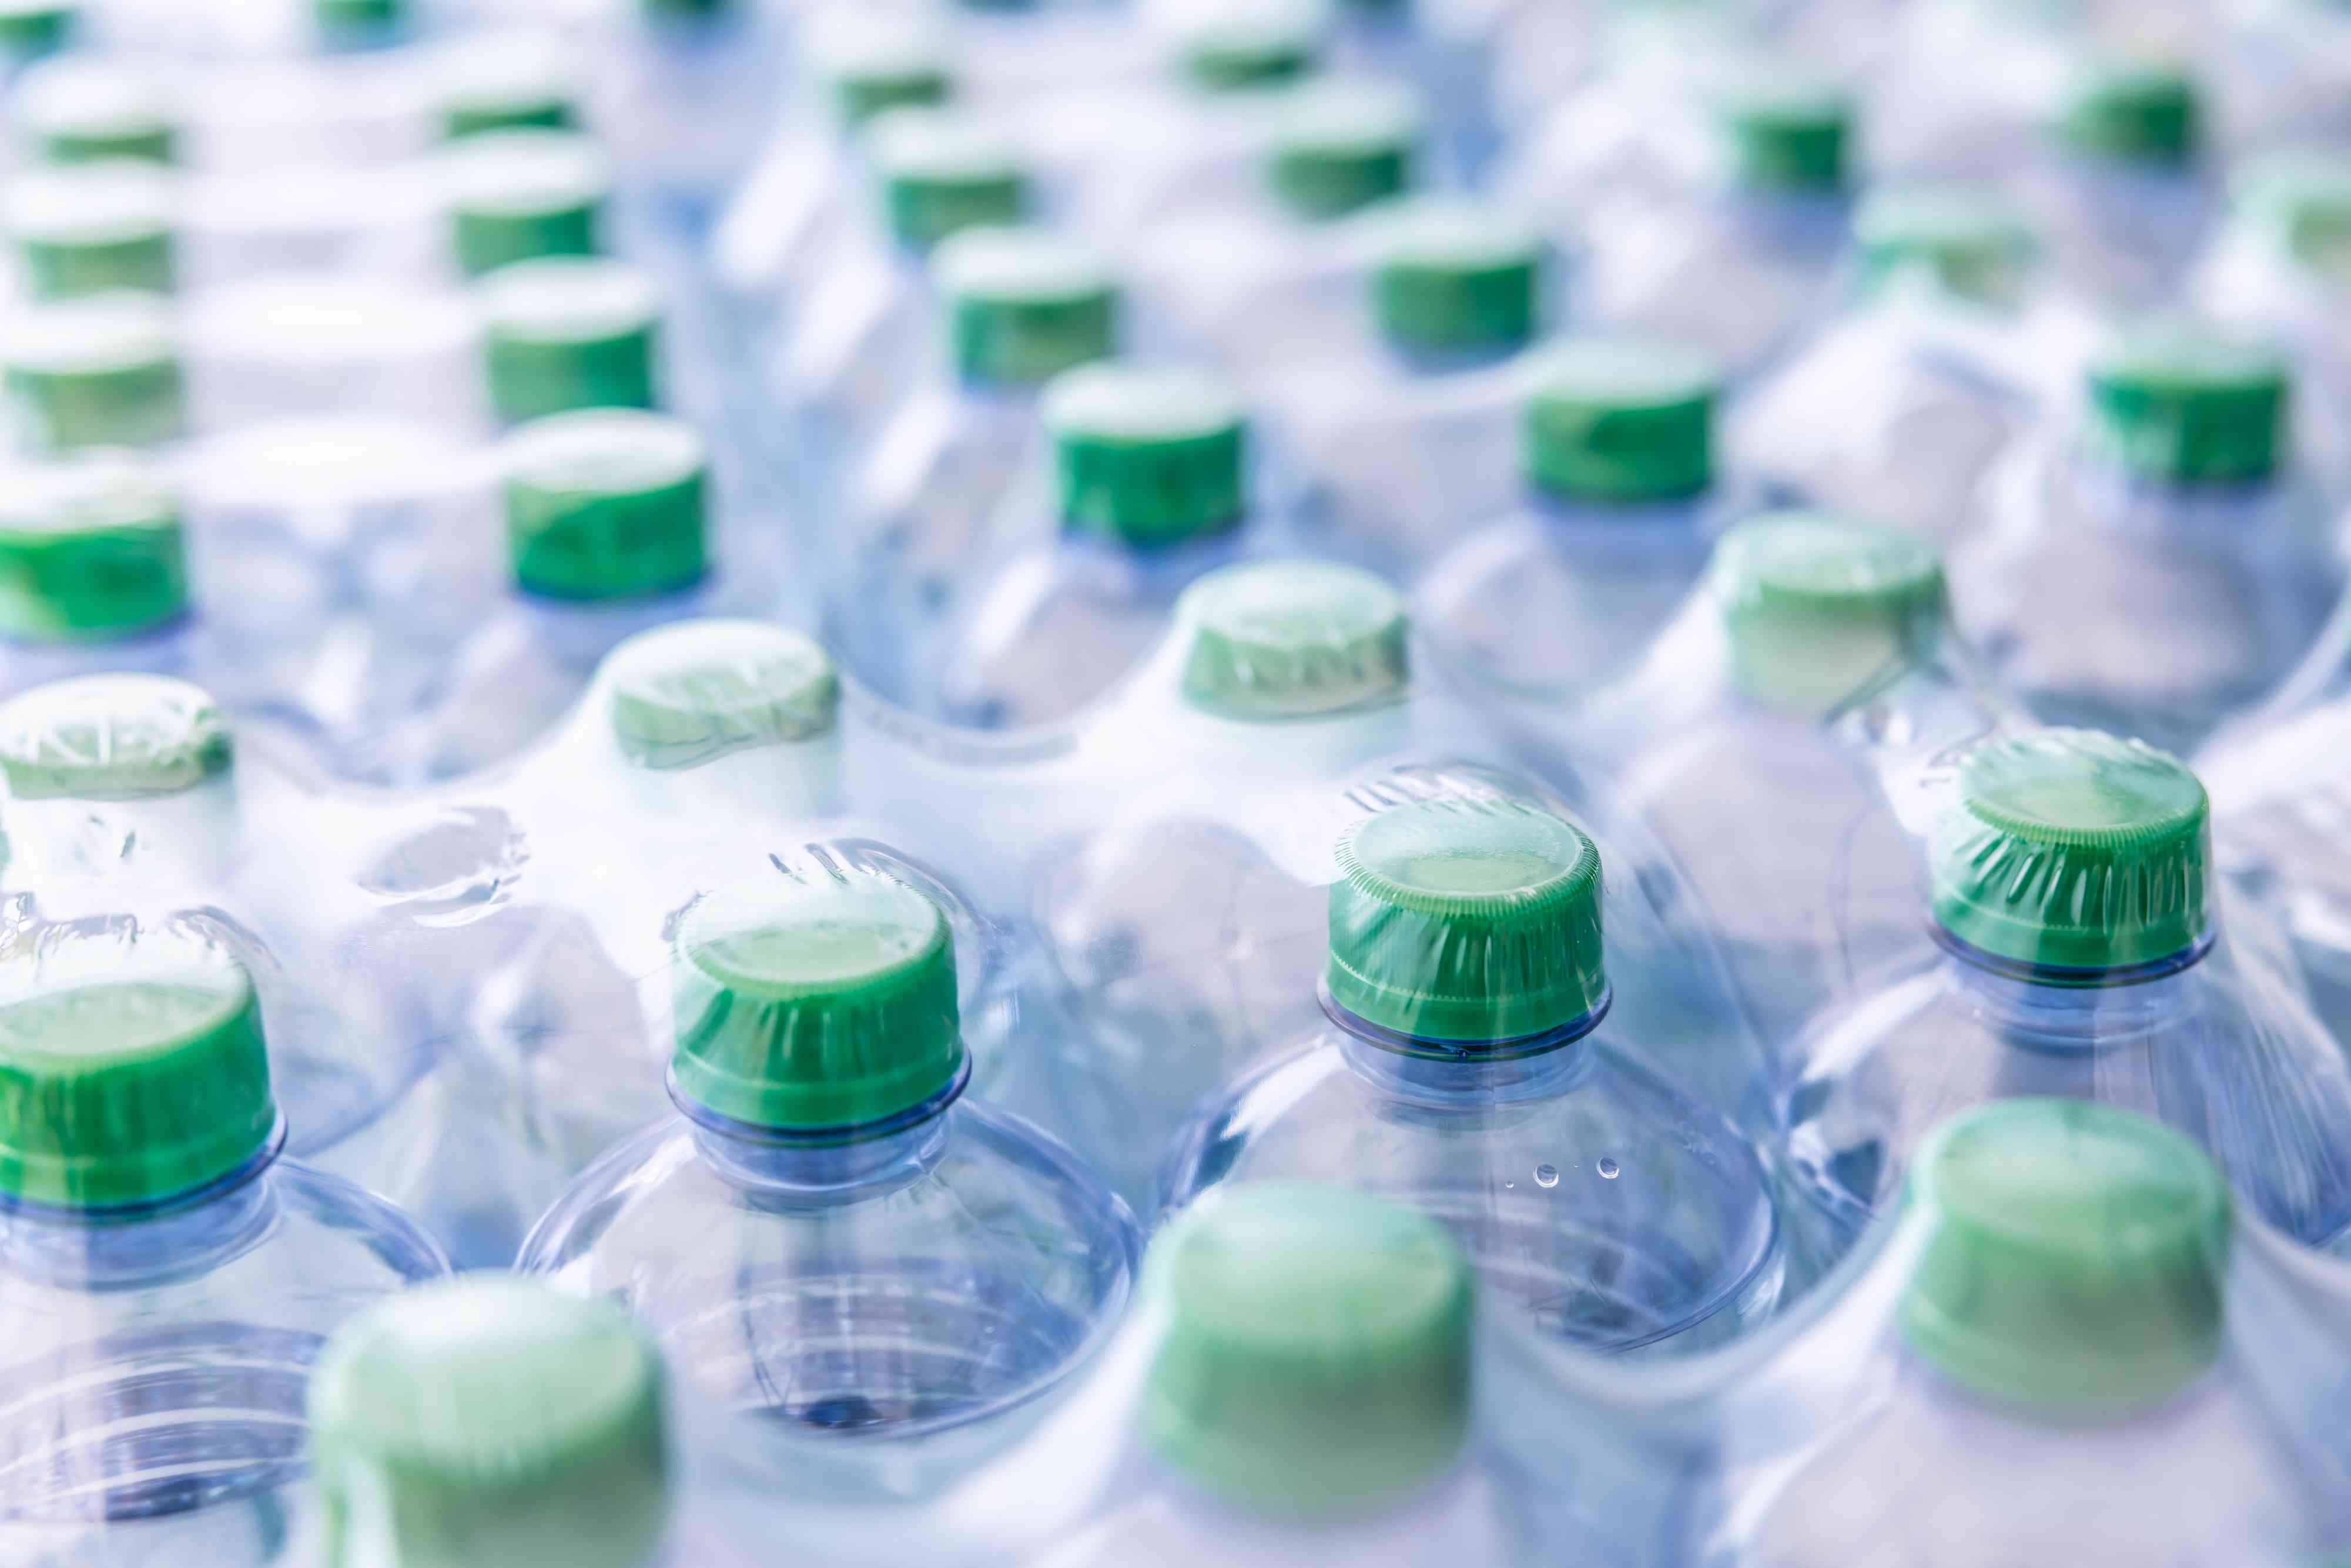 1.9 Million Bottles of Water Recalled Due to Bacteria and High Levels of Manganese